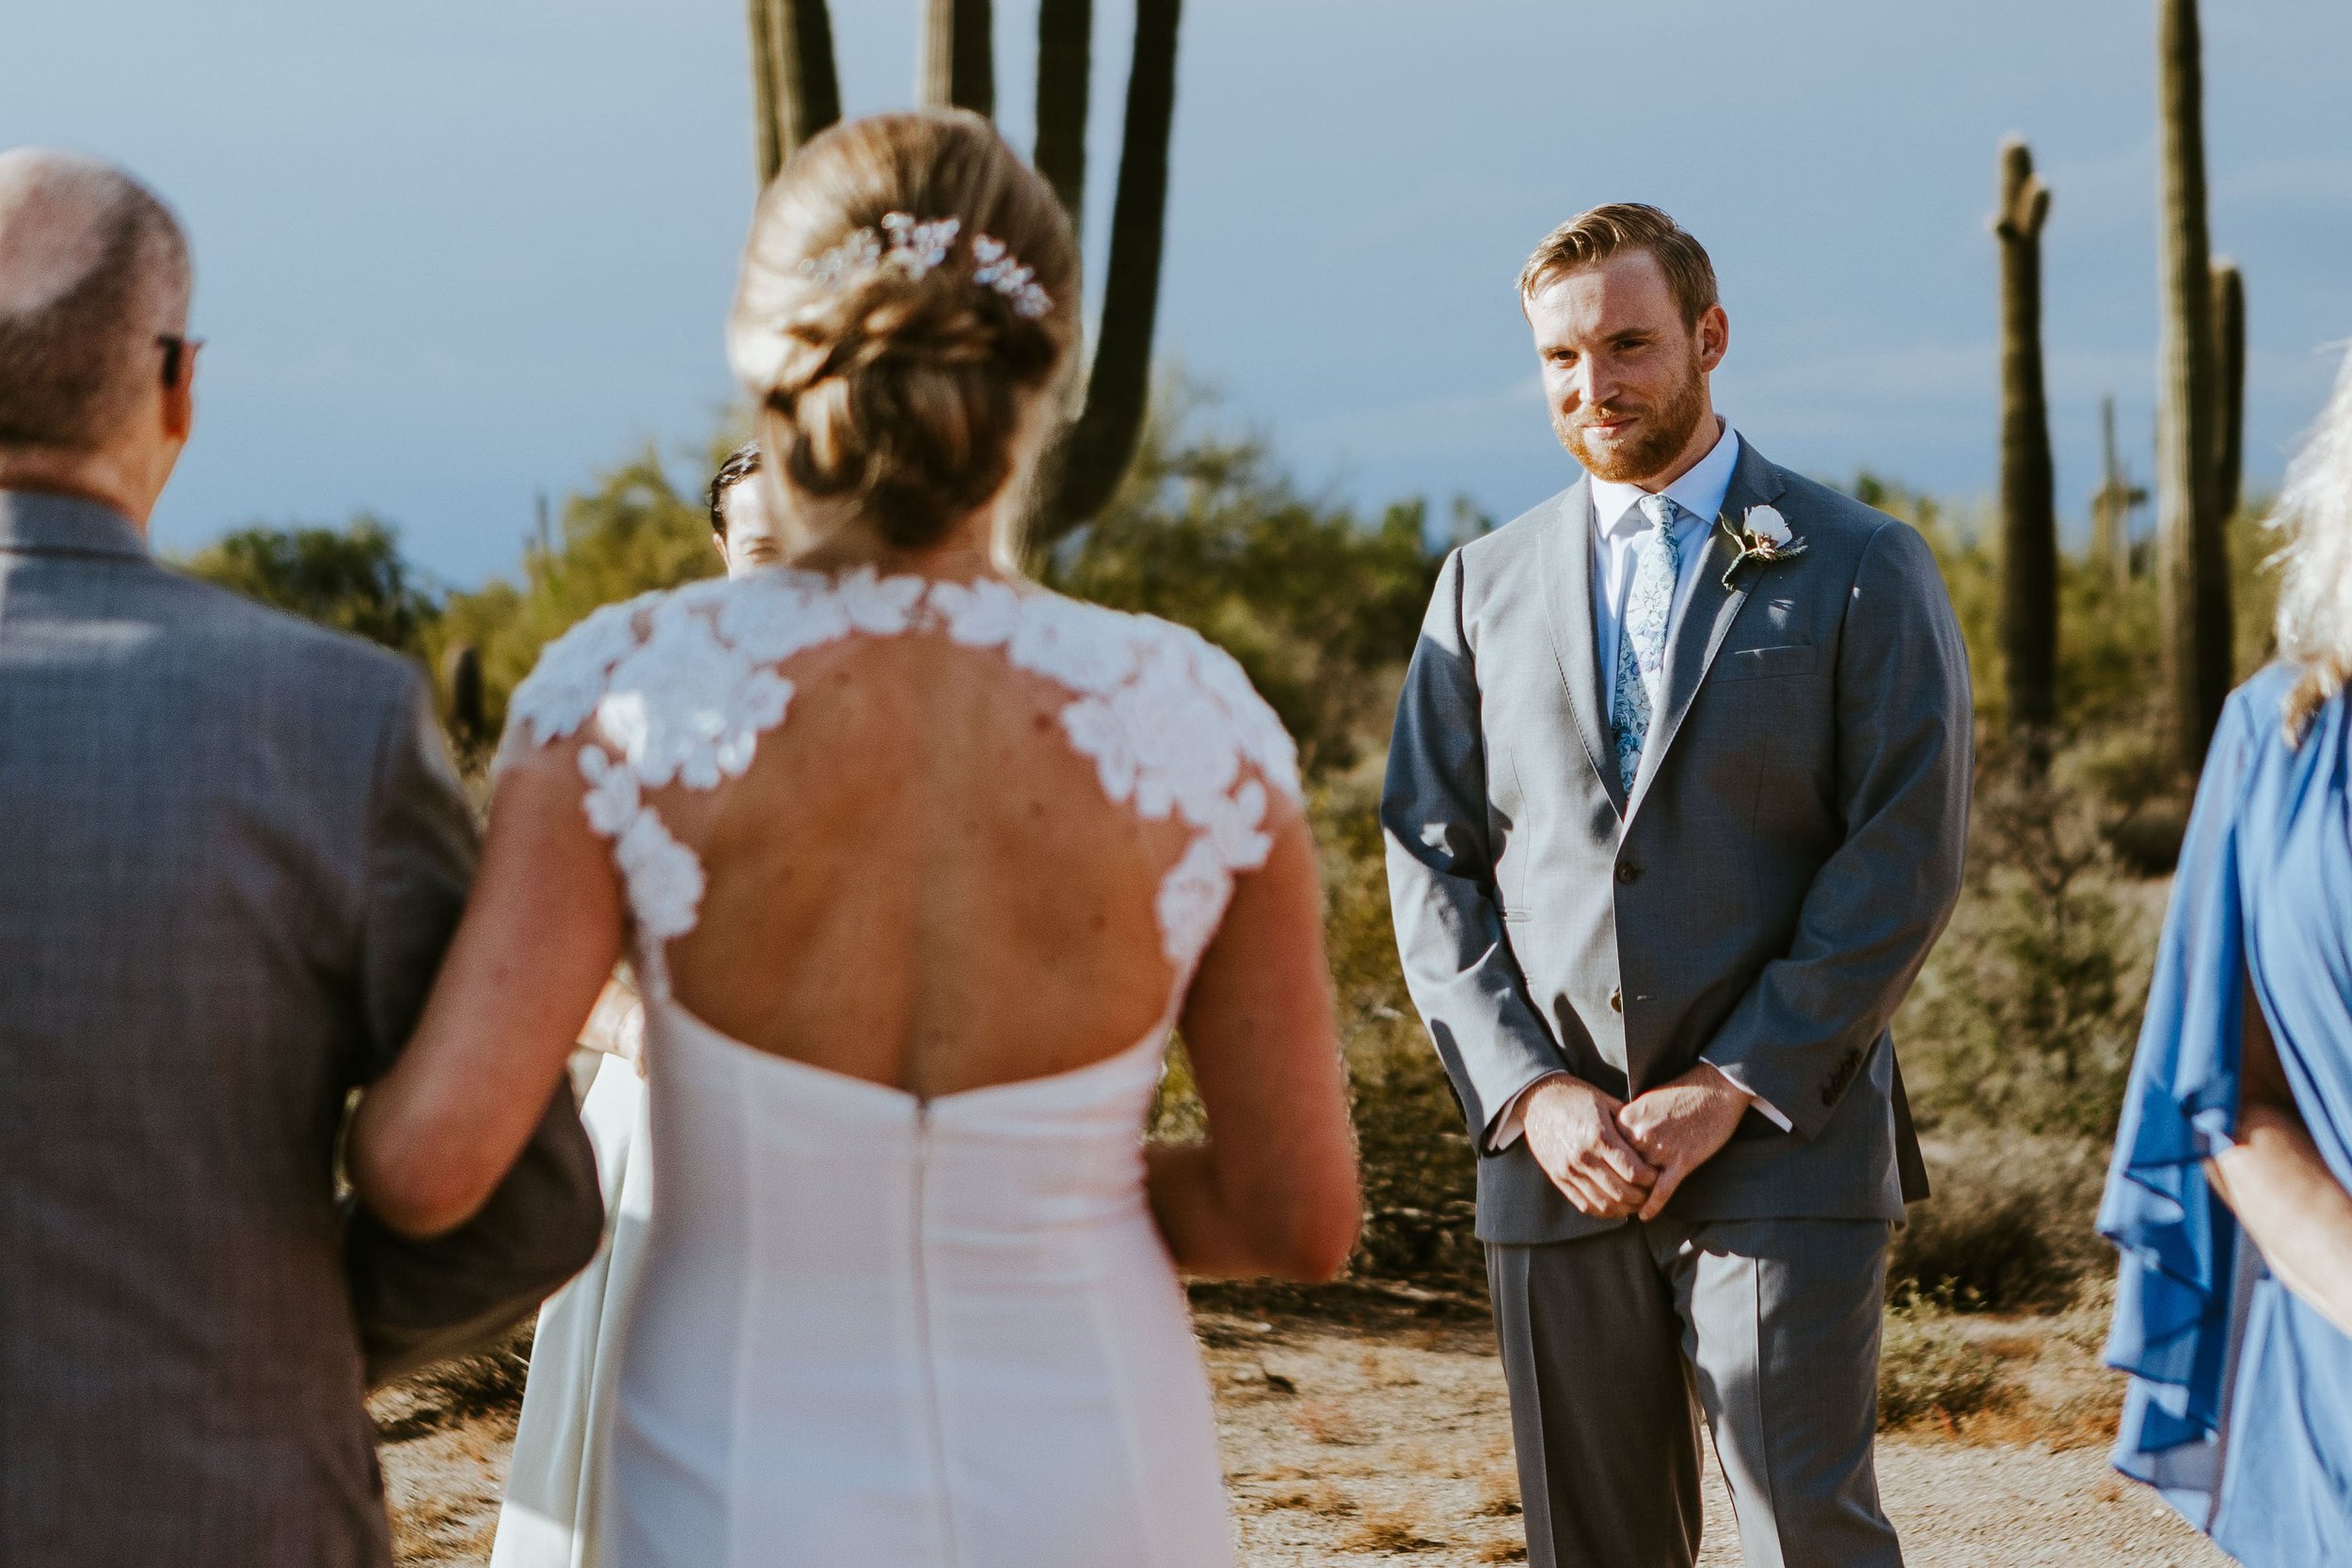 Groom smiles as bride walks down the aisle at their outdoor fall wedding ceremony in Arizona